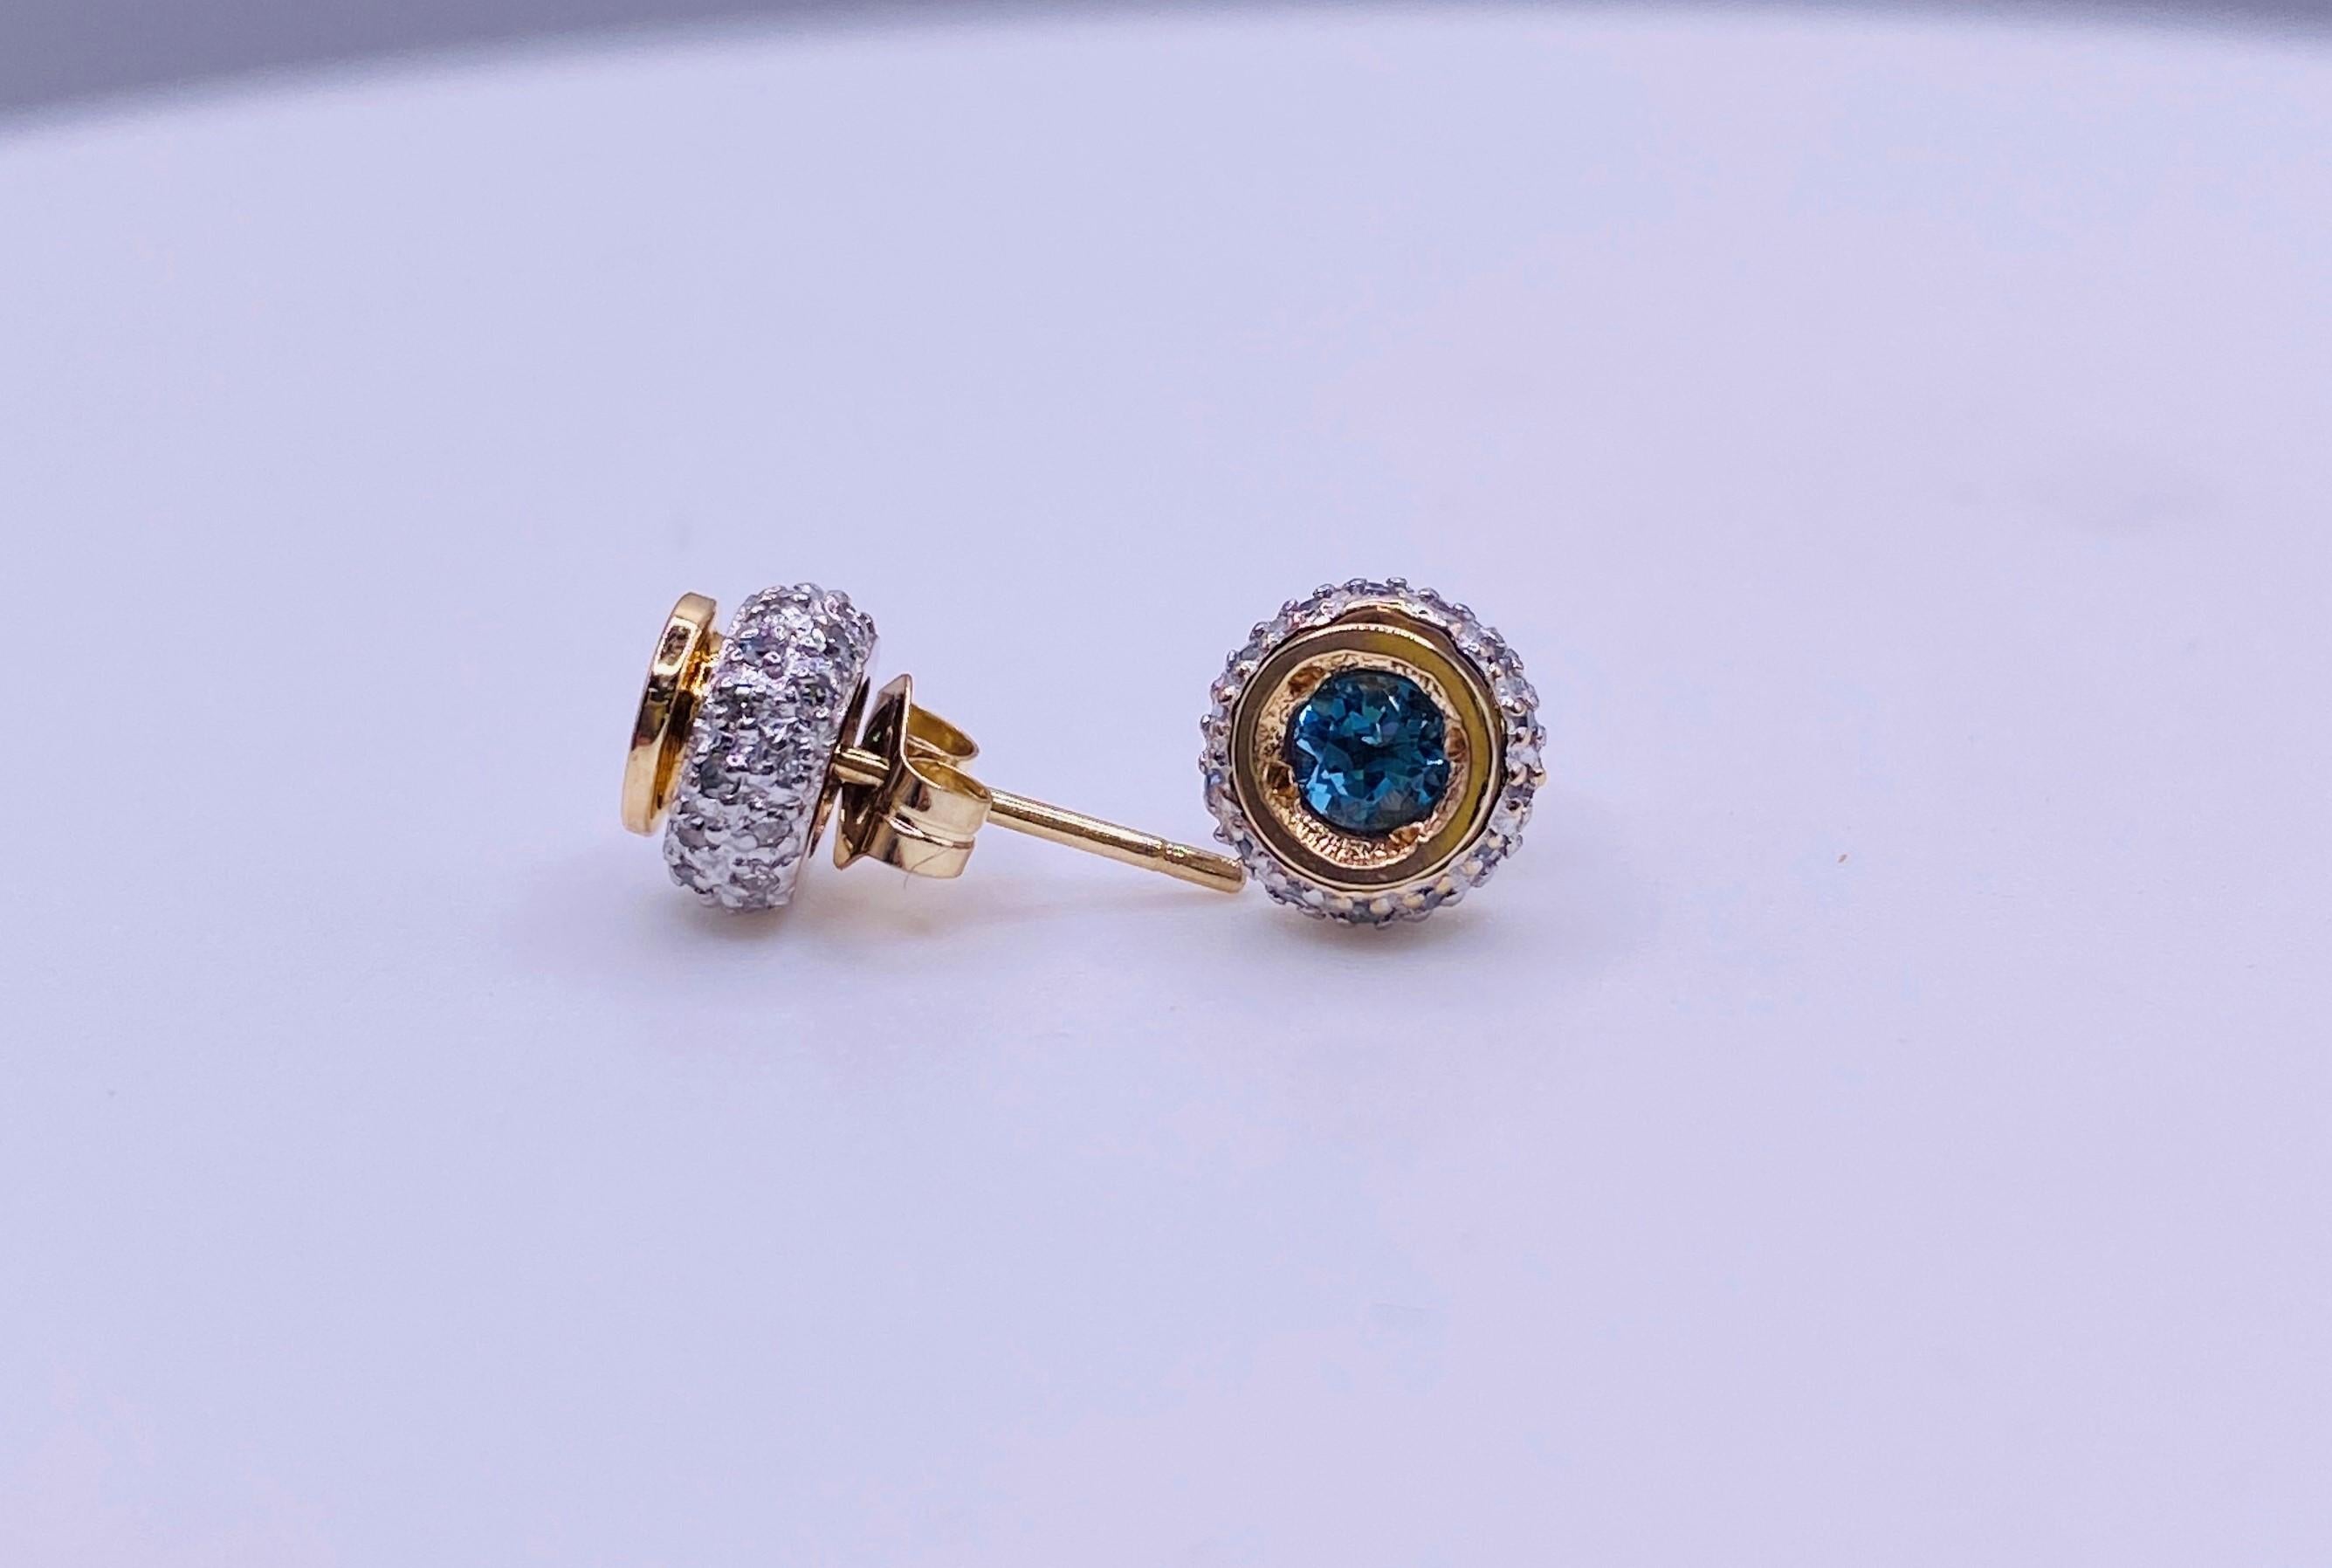 14k two tone stud earrings with .28 carat total weight blue topaz and .32 carat total weight diamonds. 